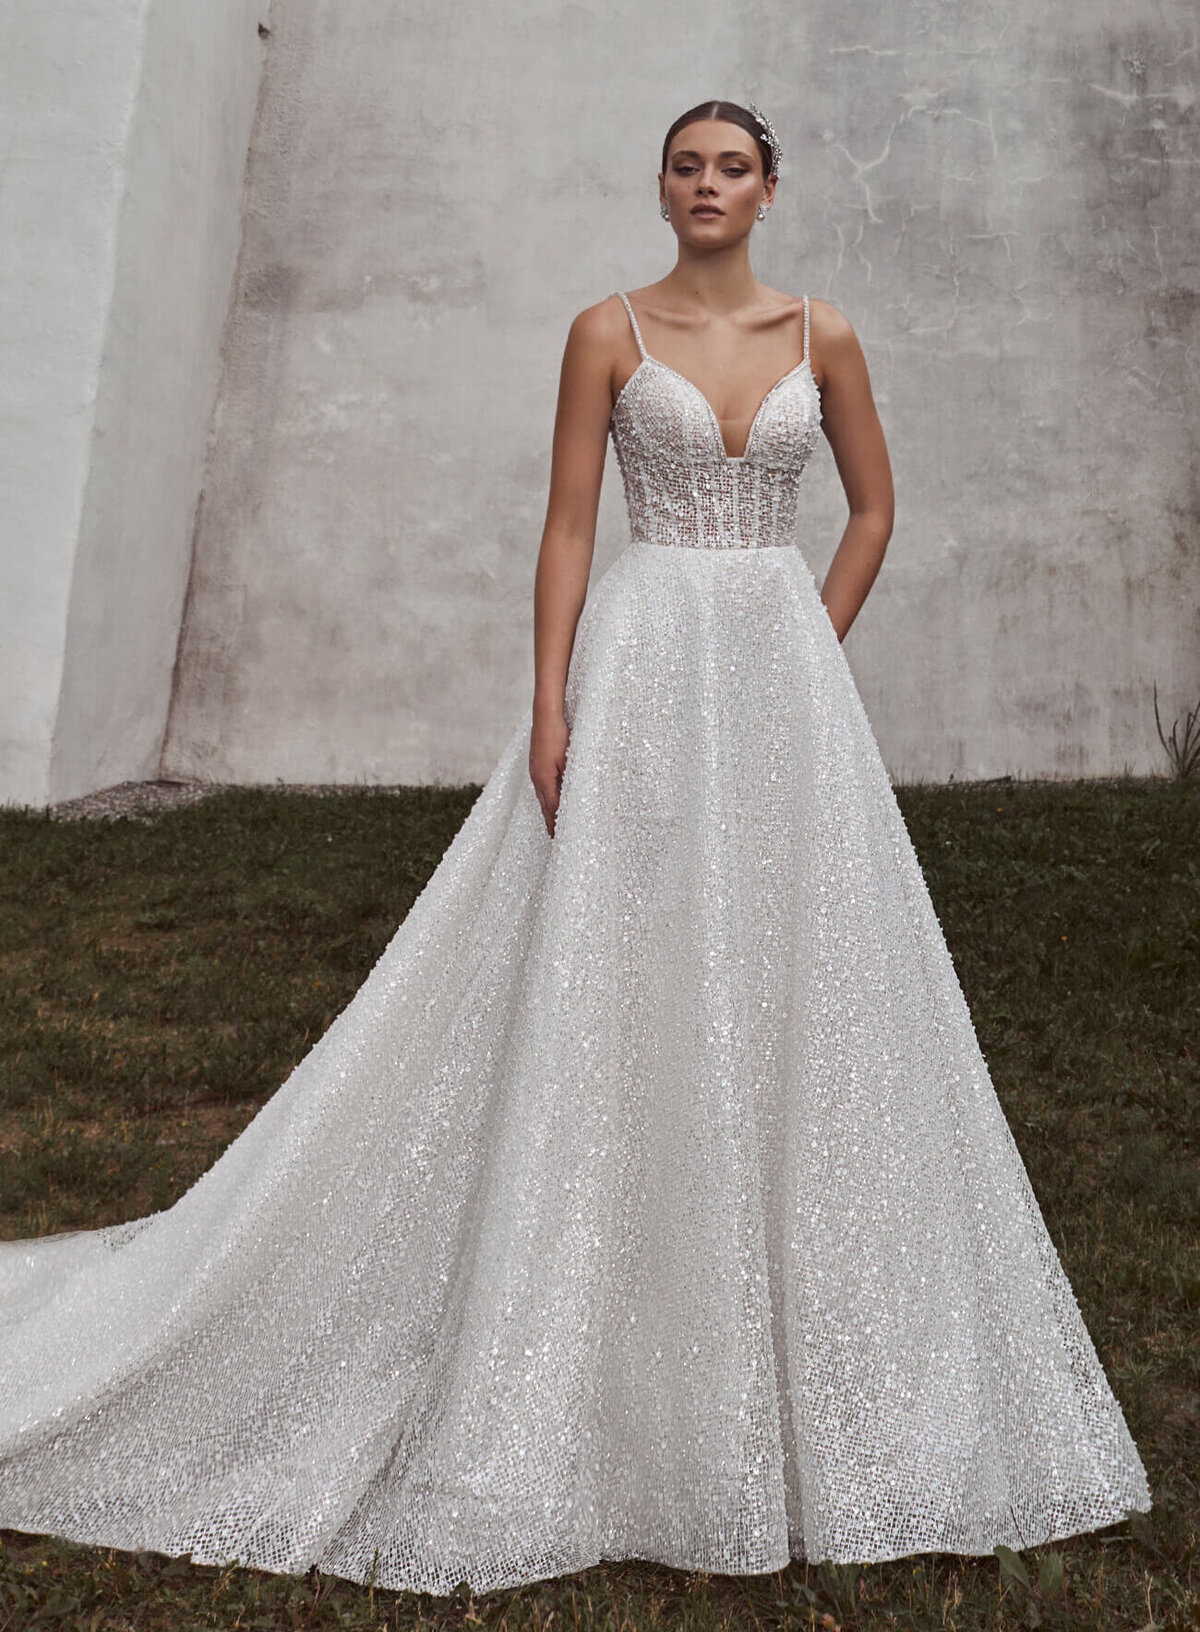 uploads_1700065425547-124101-Philipa-Sparkly-A-Line-Wedding-Dress-with-Beaded-Lace-and-Sweetheart-Neckline-1